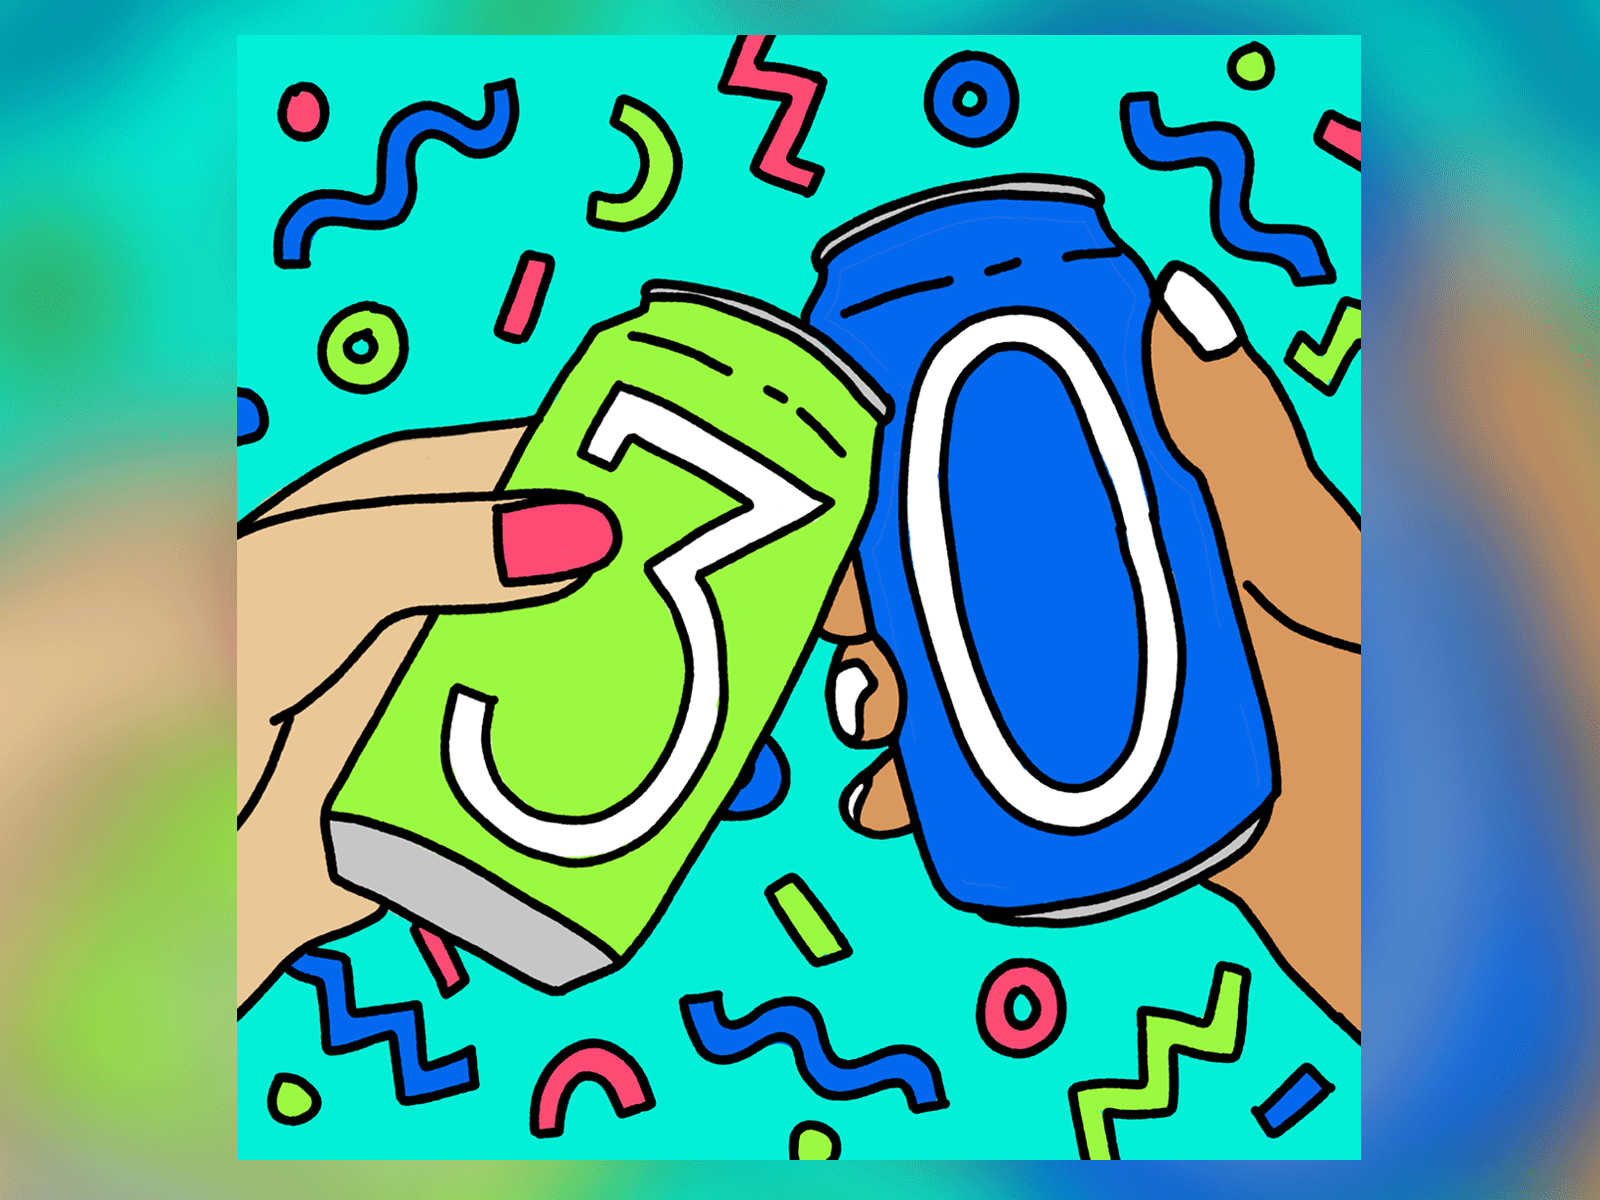 Cheers to 30! 2d animation beer birthday cheers design draw drawing gif gif animated gifs graphicdesign handdrawn happybirthday illustration inspiration inspo ipadpro ipadprocreate procreate